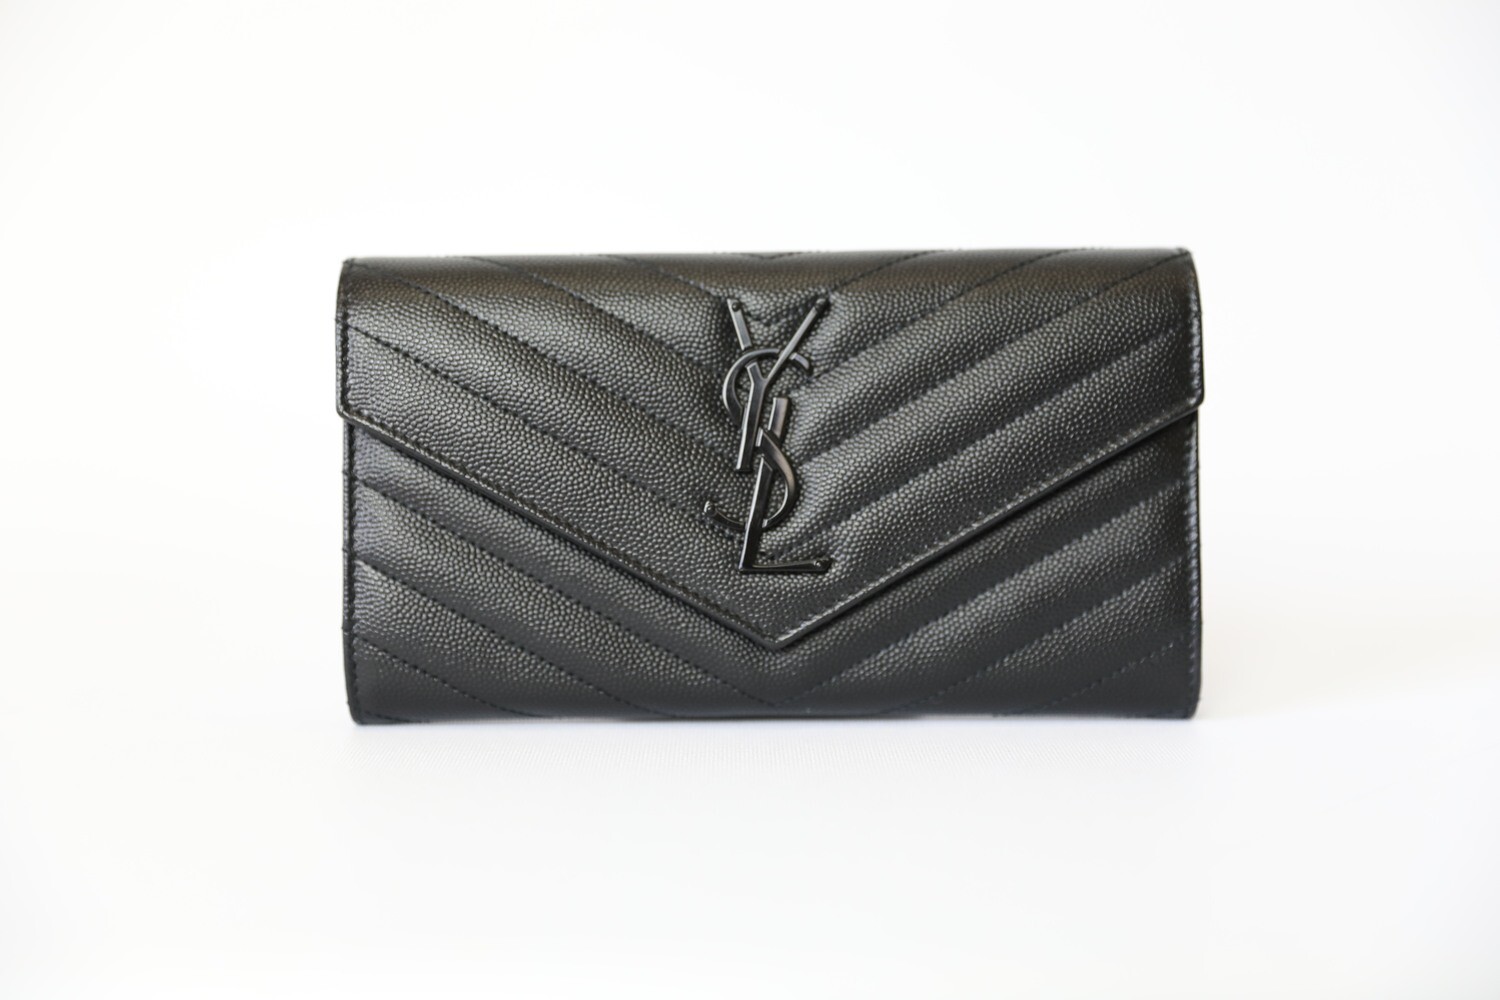 Saint Laurent Envelope Flap Wallet, So Black Leather, Preowned in Dustbag  WA001